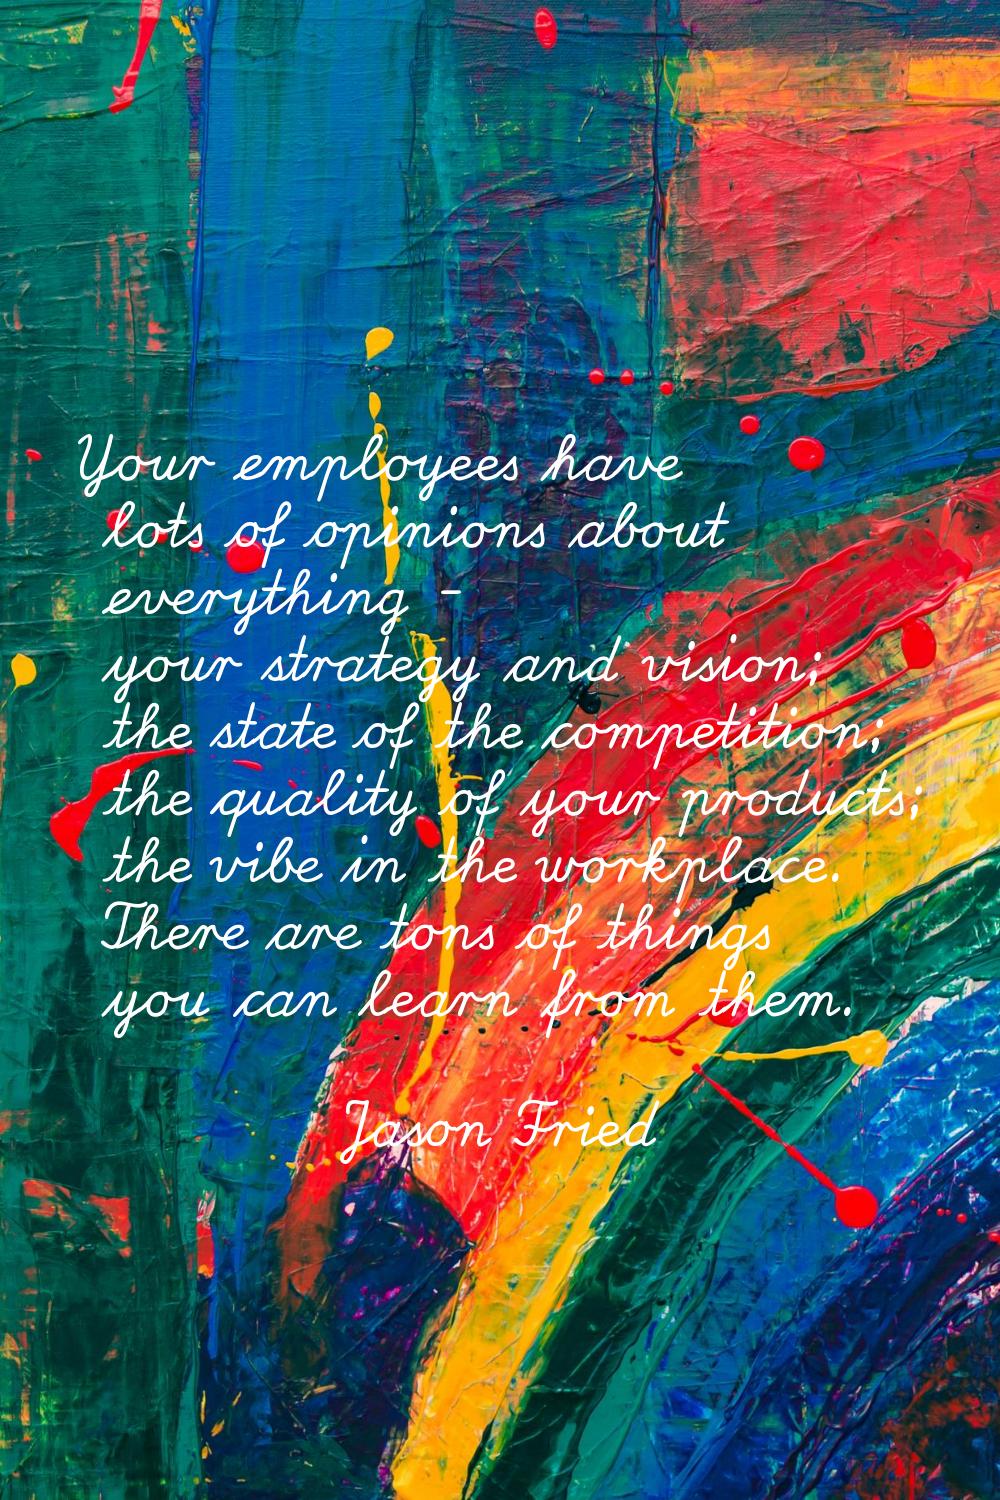 Your employees have lots of opinions about everything - your strategy and vision; the state of the 